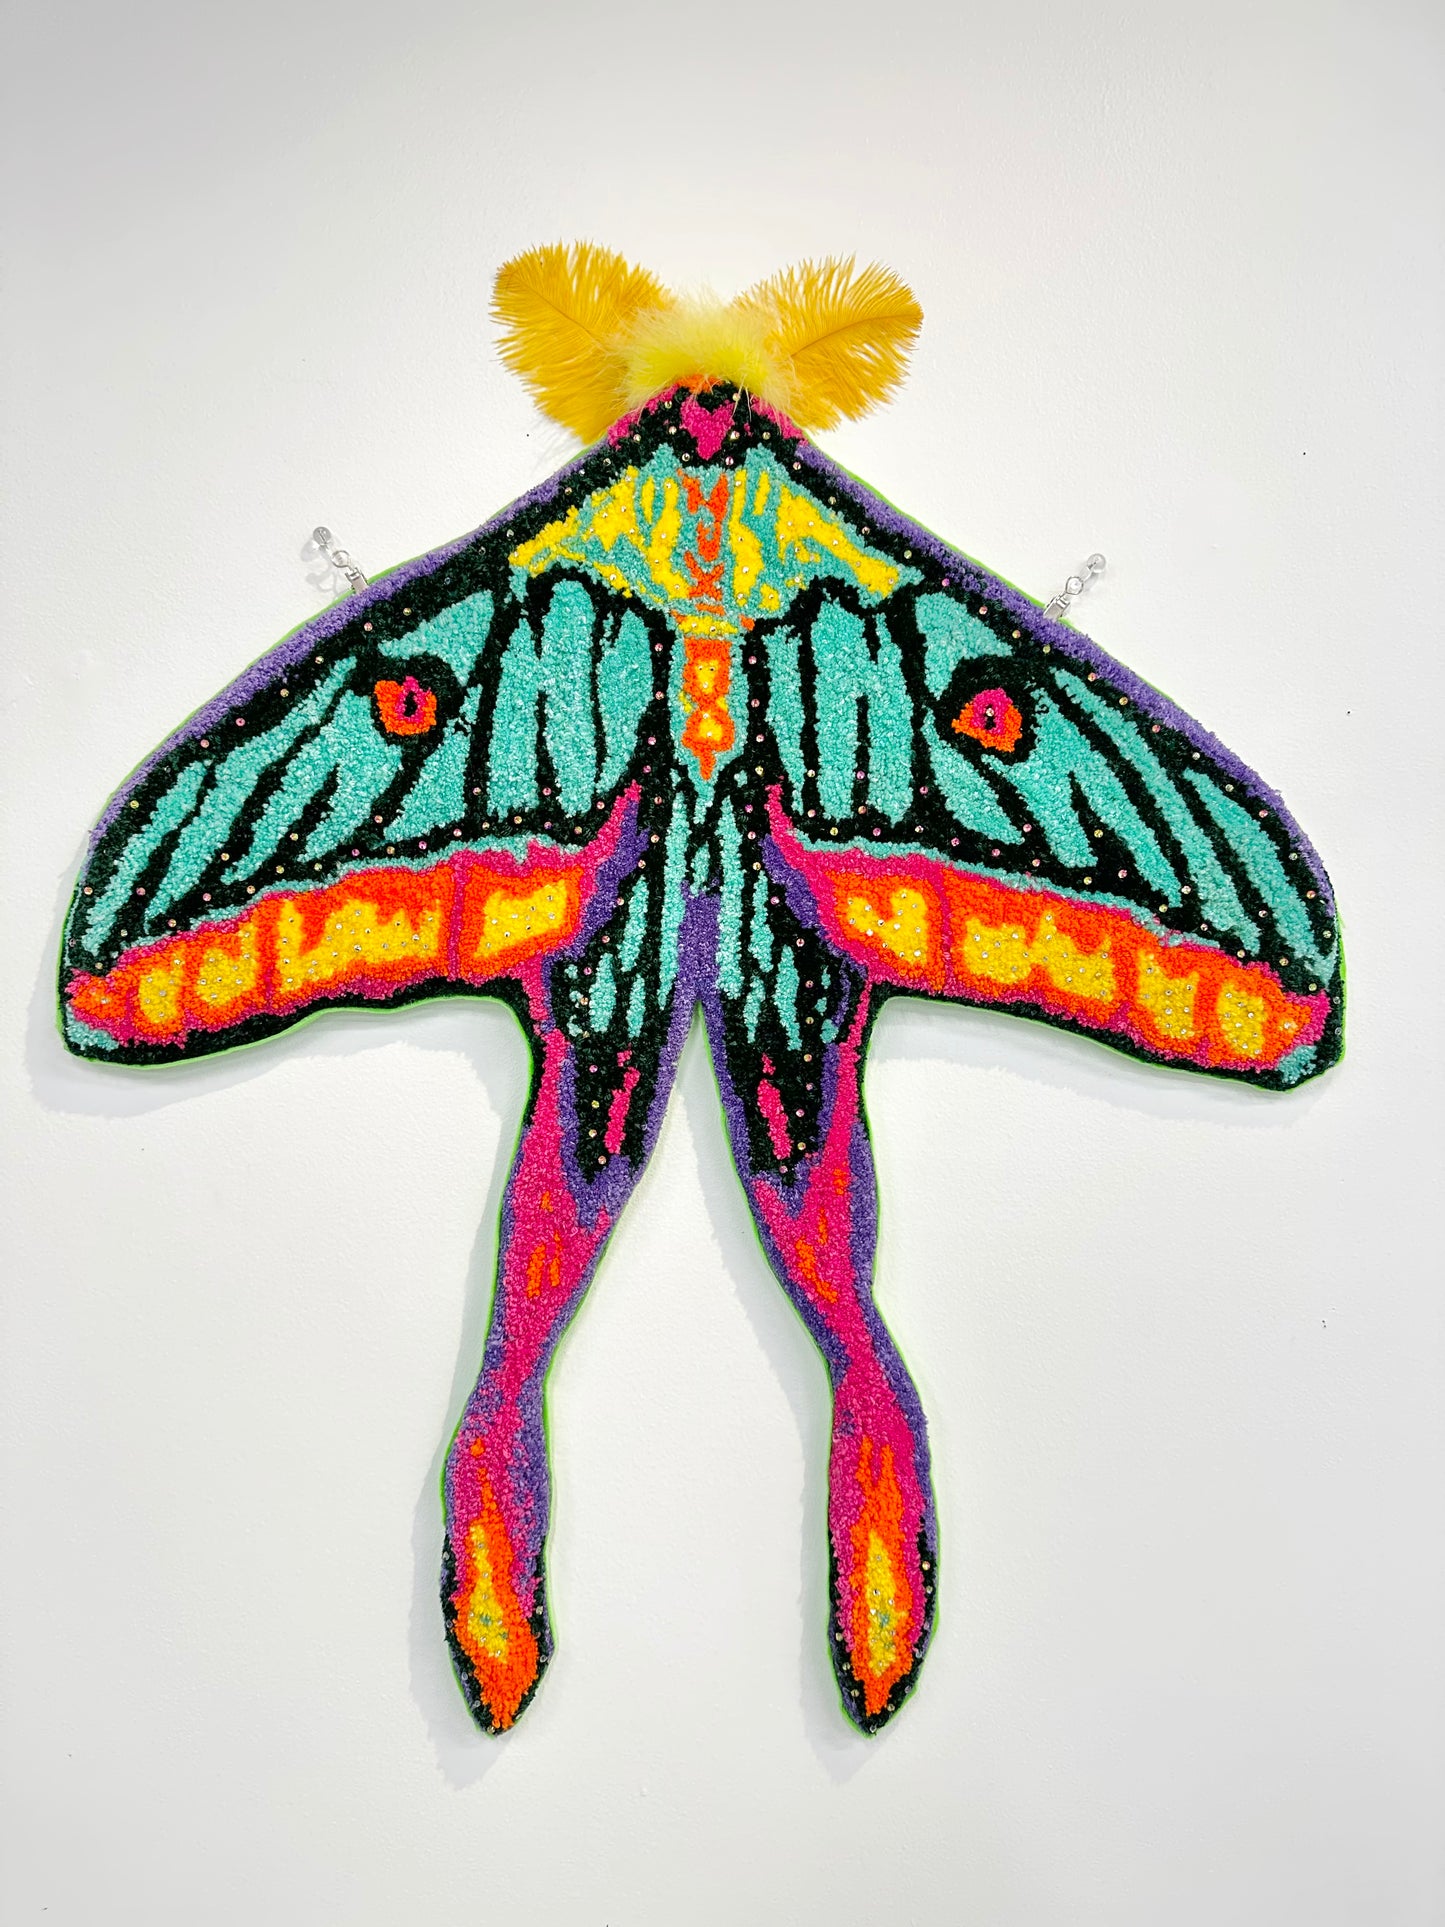 HandMade By The Artist: Bedazzled Mardi Gras Moth with Feathers , by Chrissy Crater